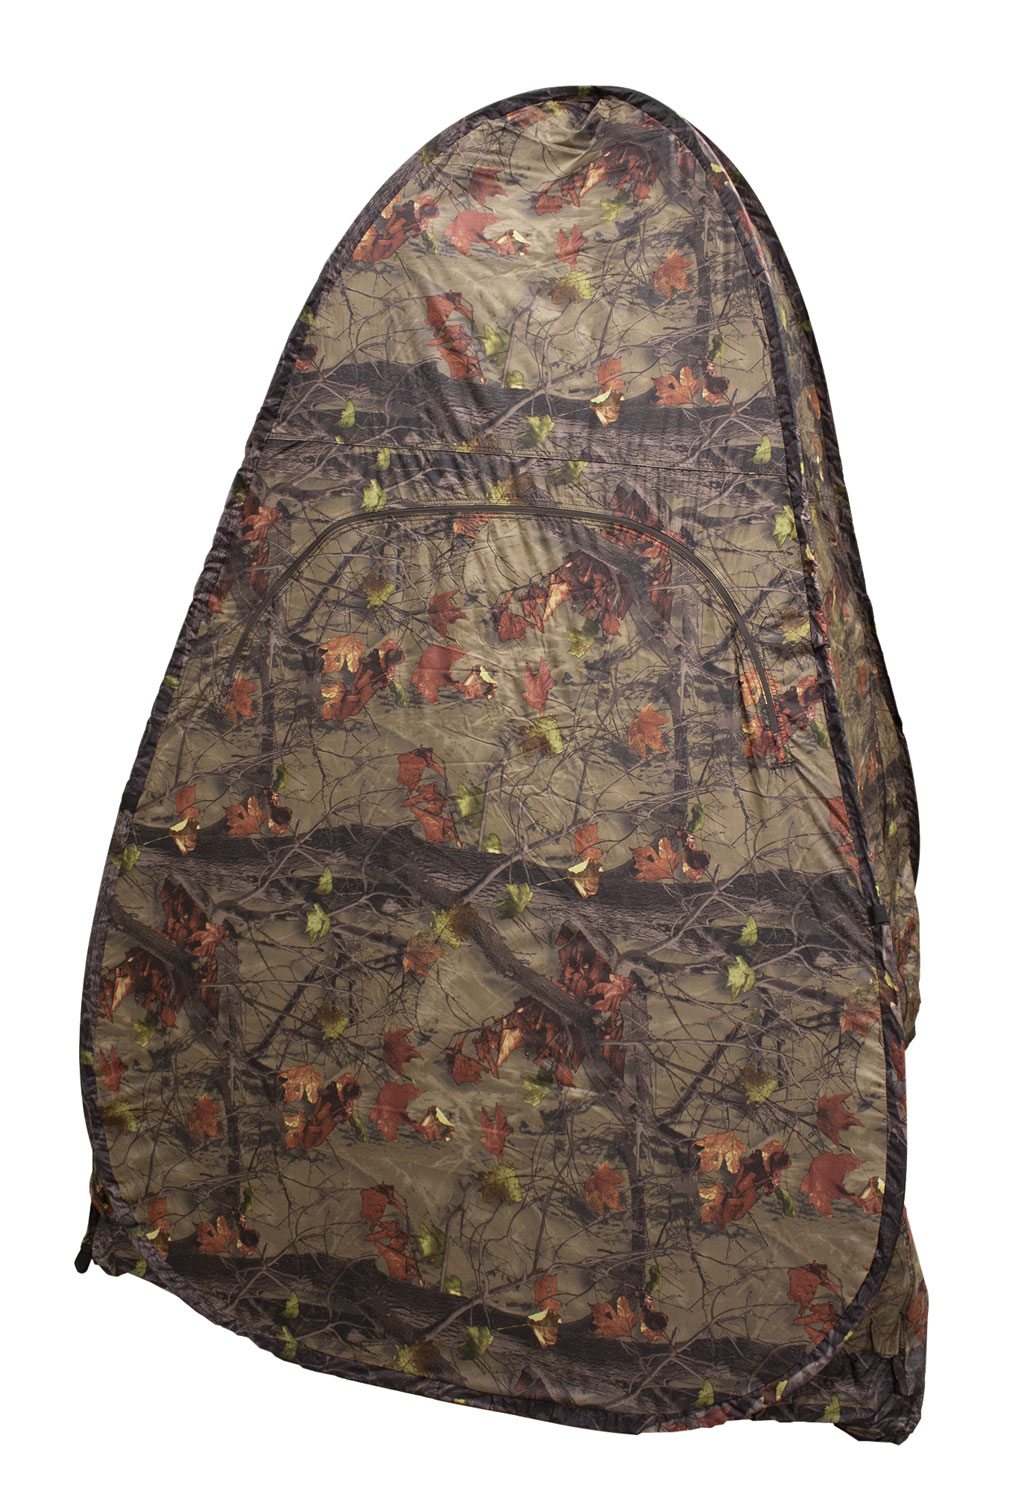 HME Spring Steel 100 Ground Blind - Stick and Limb Camo